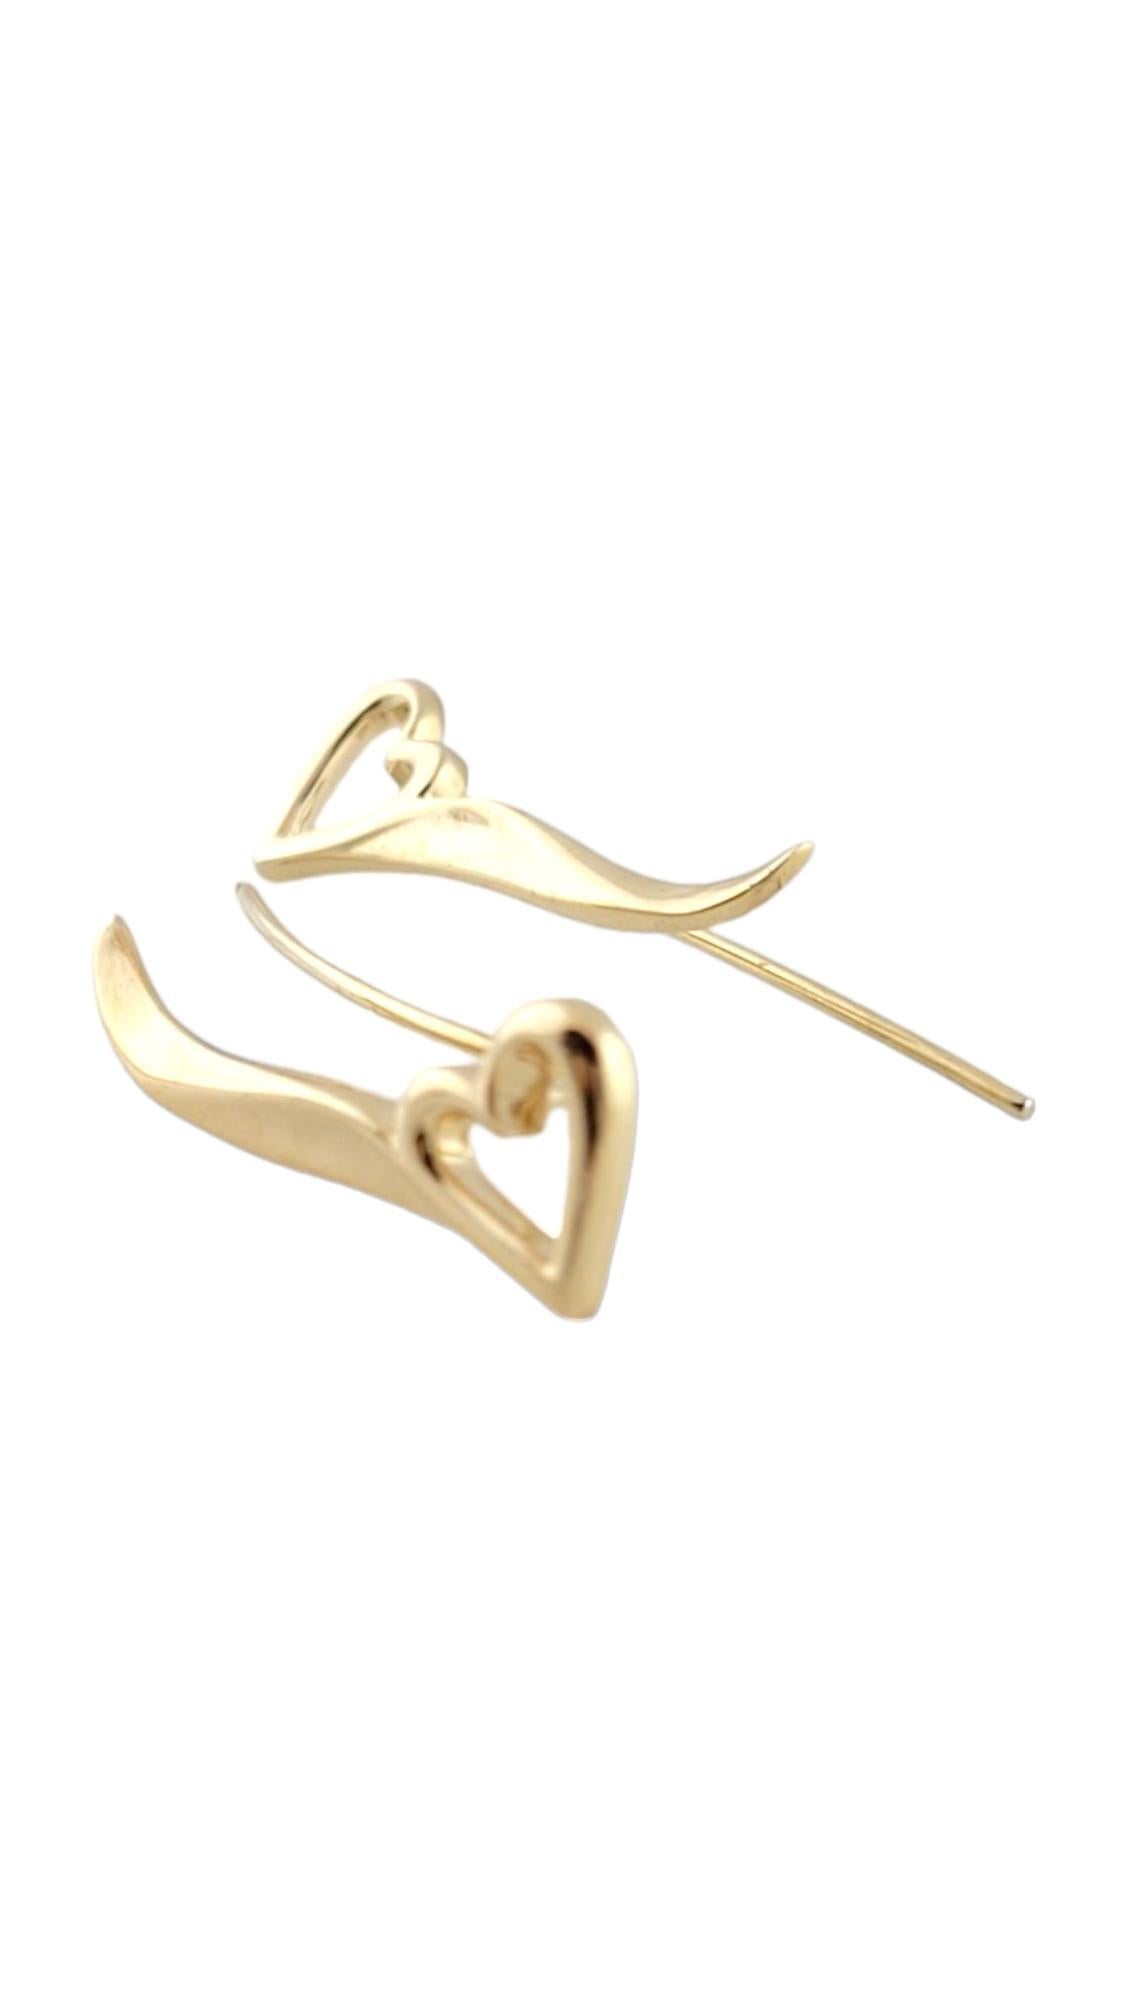 Vintage 14K Yellow Gold Heart Ear Climber Earrings

This gorgeous set of ear climber earrings have a beautiful heart design and are crafted from 14K yellow gold!

Size: 25.21mm X 8.52mm X 1.44mm
		 0.992